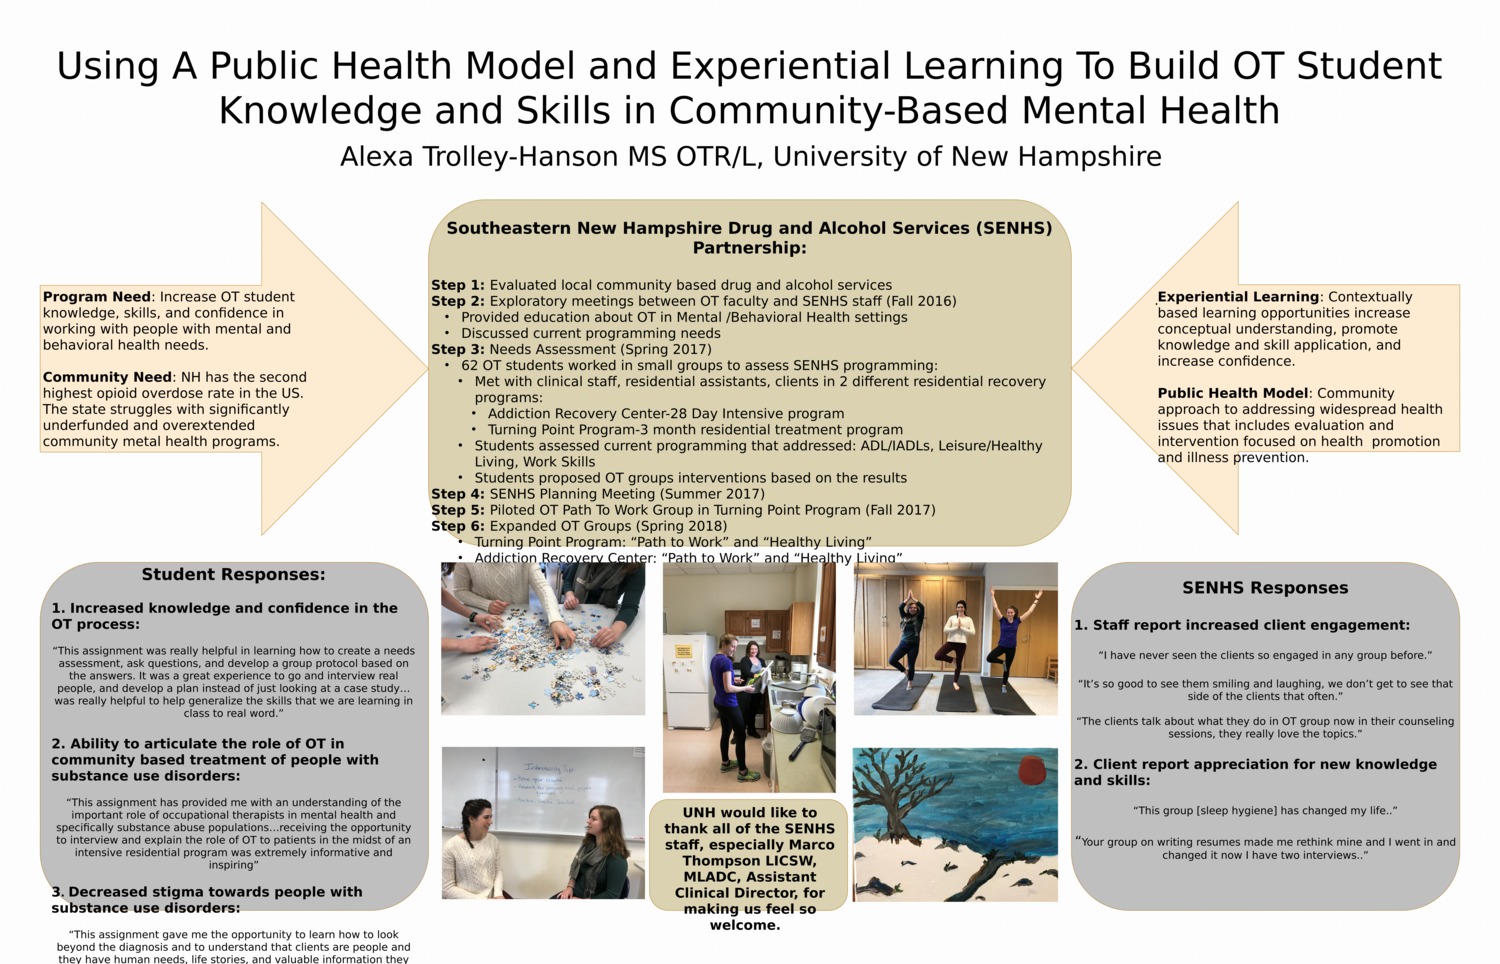 Using A Public Health Model And Experiential Learning To Build Ot Student Knowledge And Skills In Community-Based Mental Health by atrolley